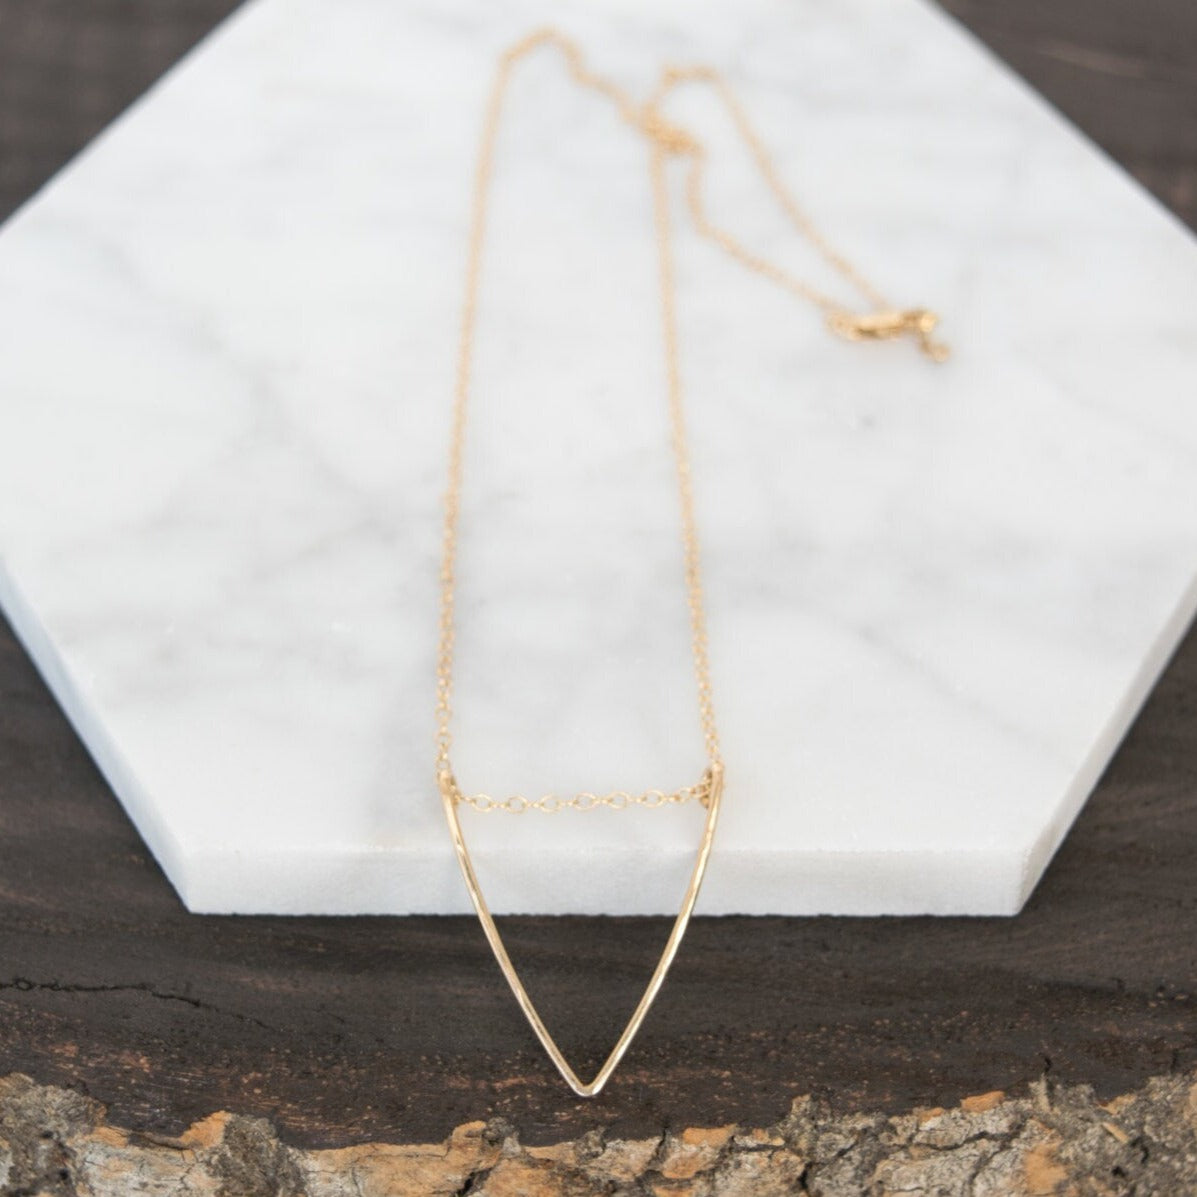 14K Rose Gold and Diamond Triangle Pennant Style Necklace – A.J. Martin